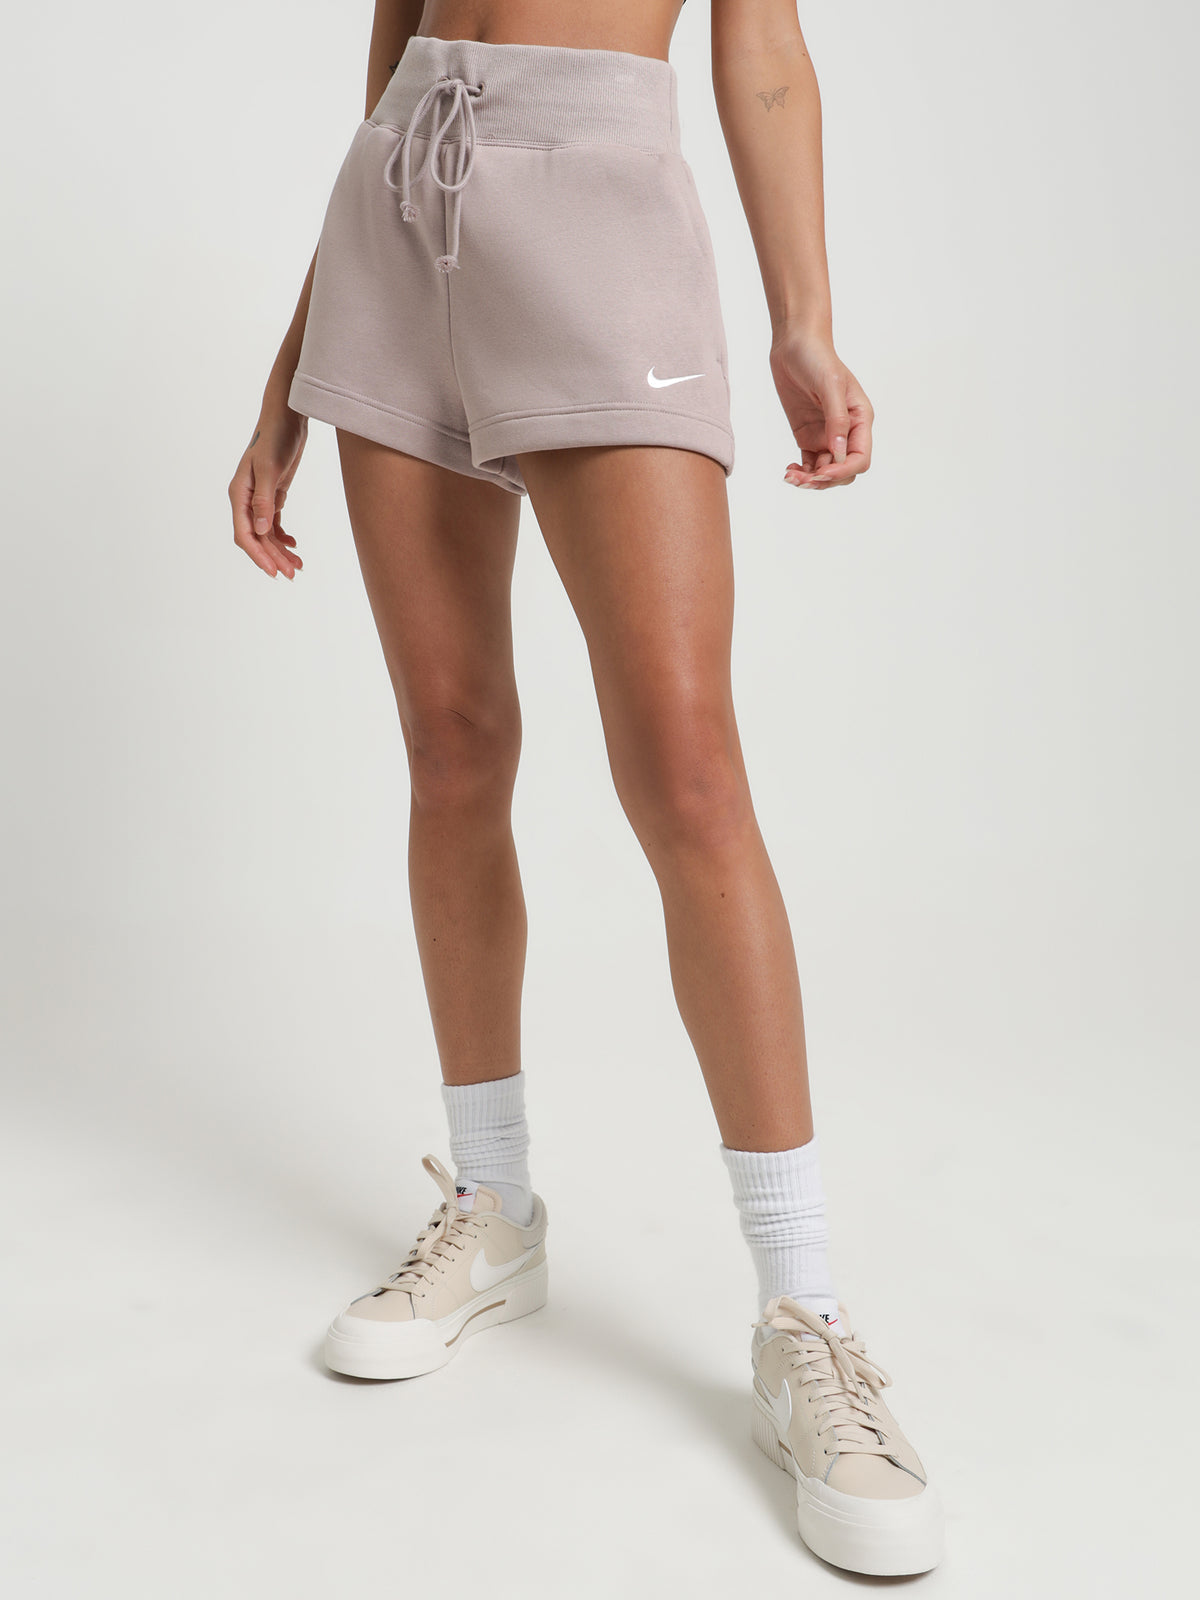 Store - Taupe Fleece Phoenix Shorts in Highrise Diffused Sportswear Glue